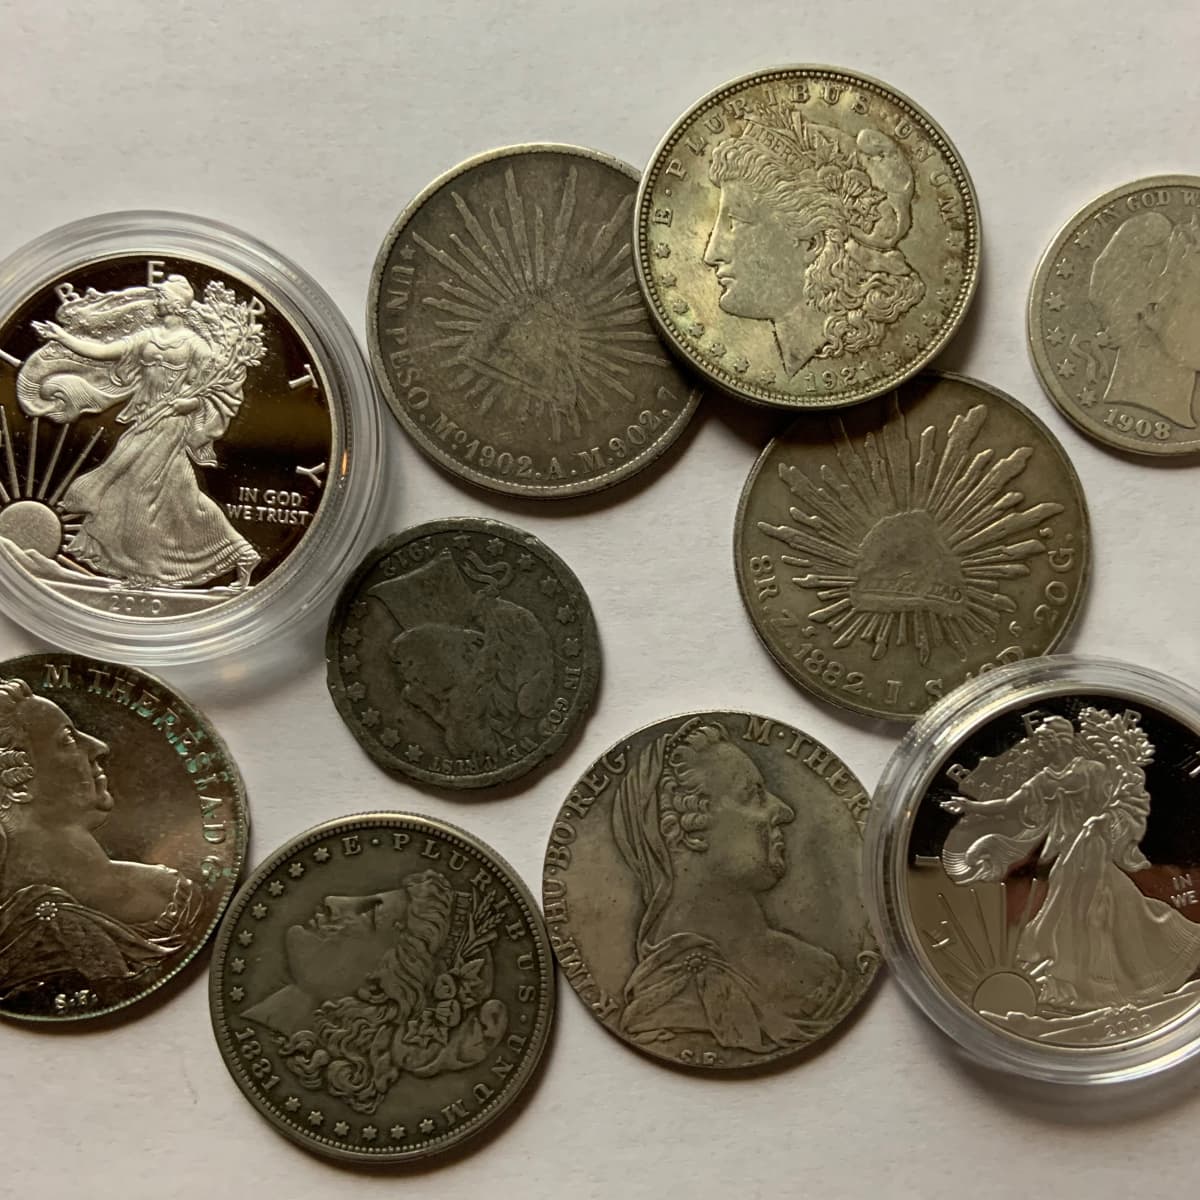 How Do You Tell If a Coin Is Real? - Grand Rapids Coins